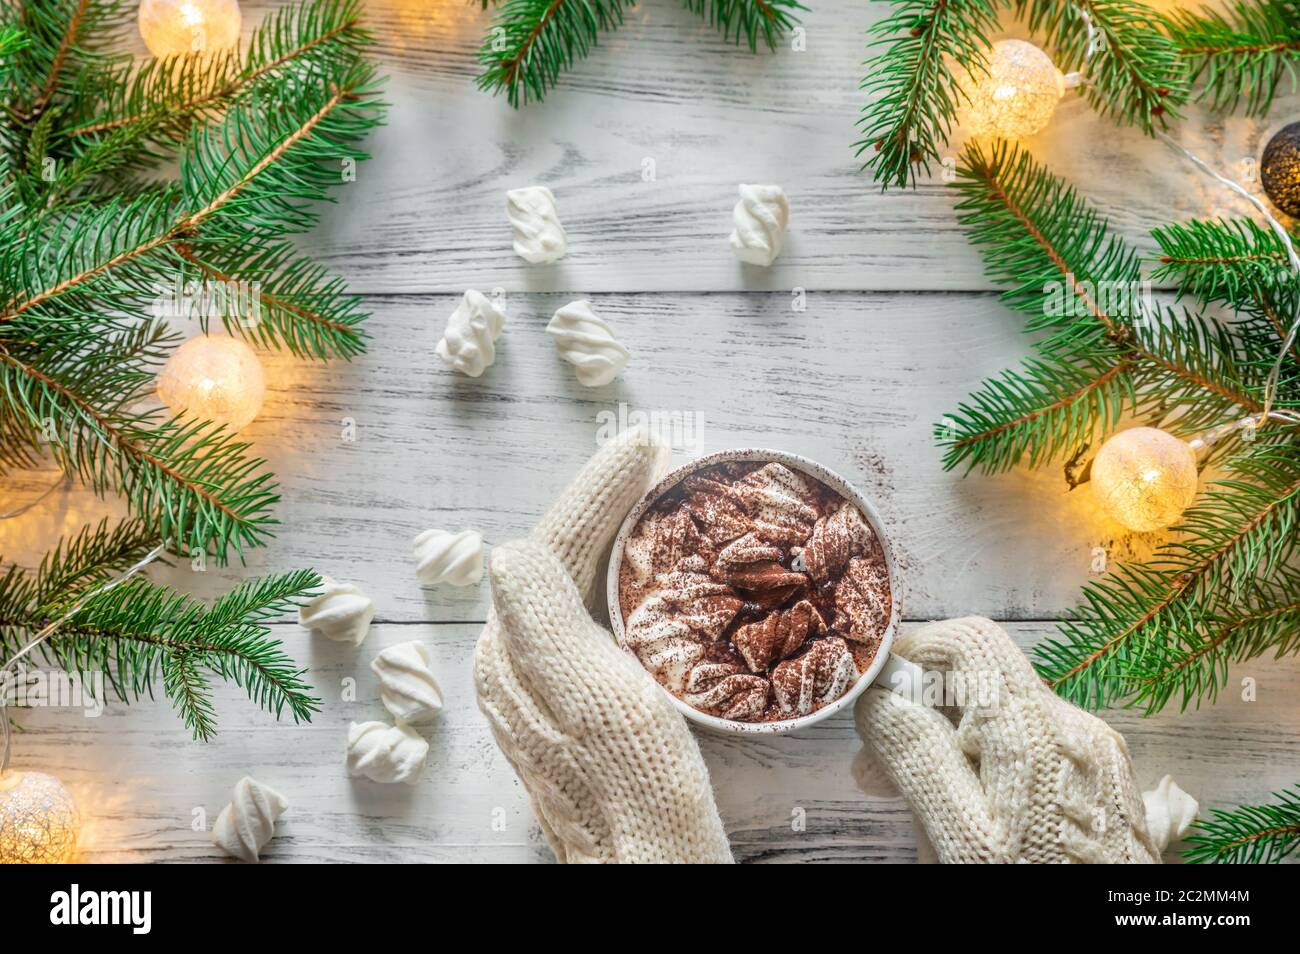 Woman's hands in wool gloves holding a cup of hot chocolate with marshmallows with decorated Christmas tree branches Stock Photo